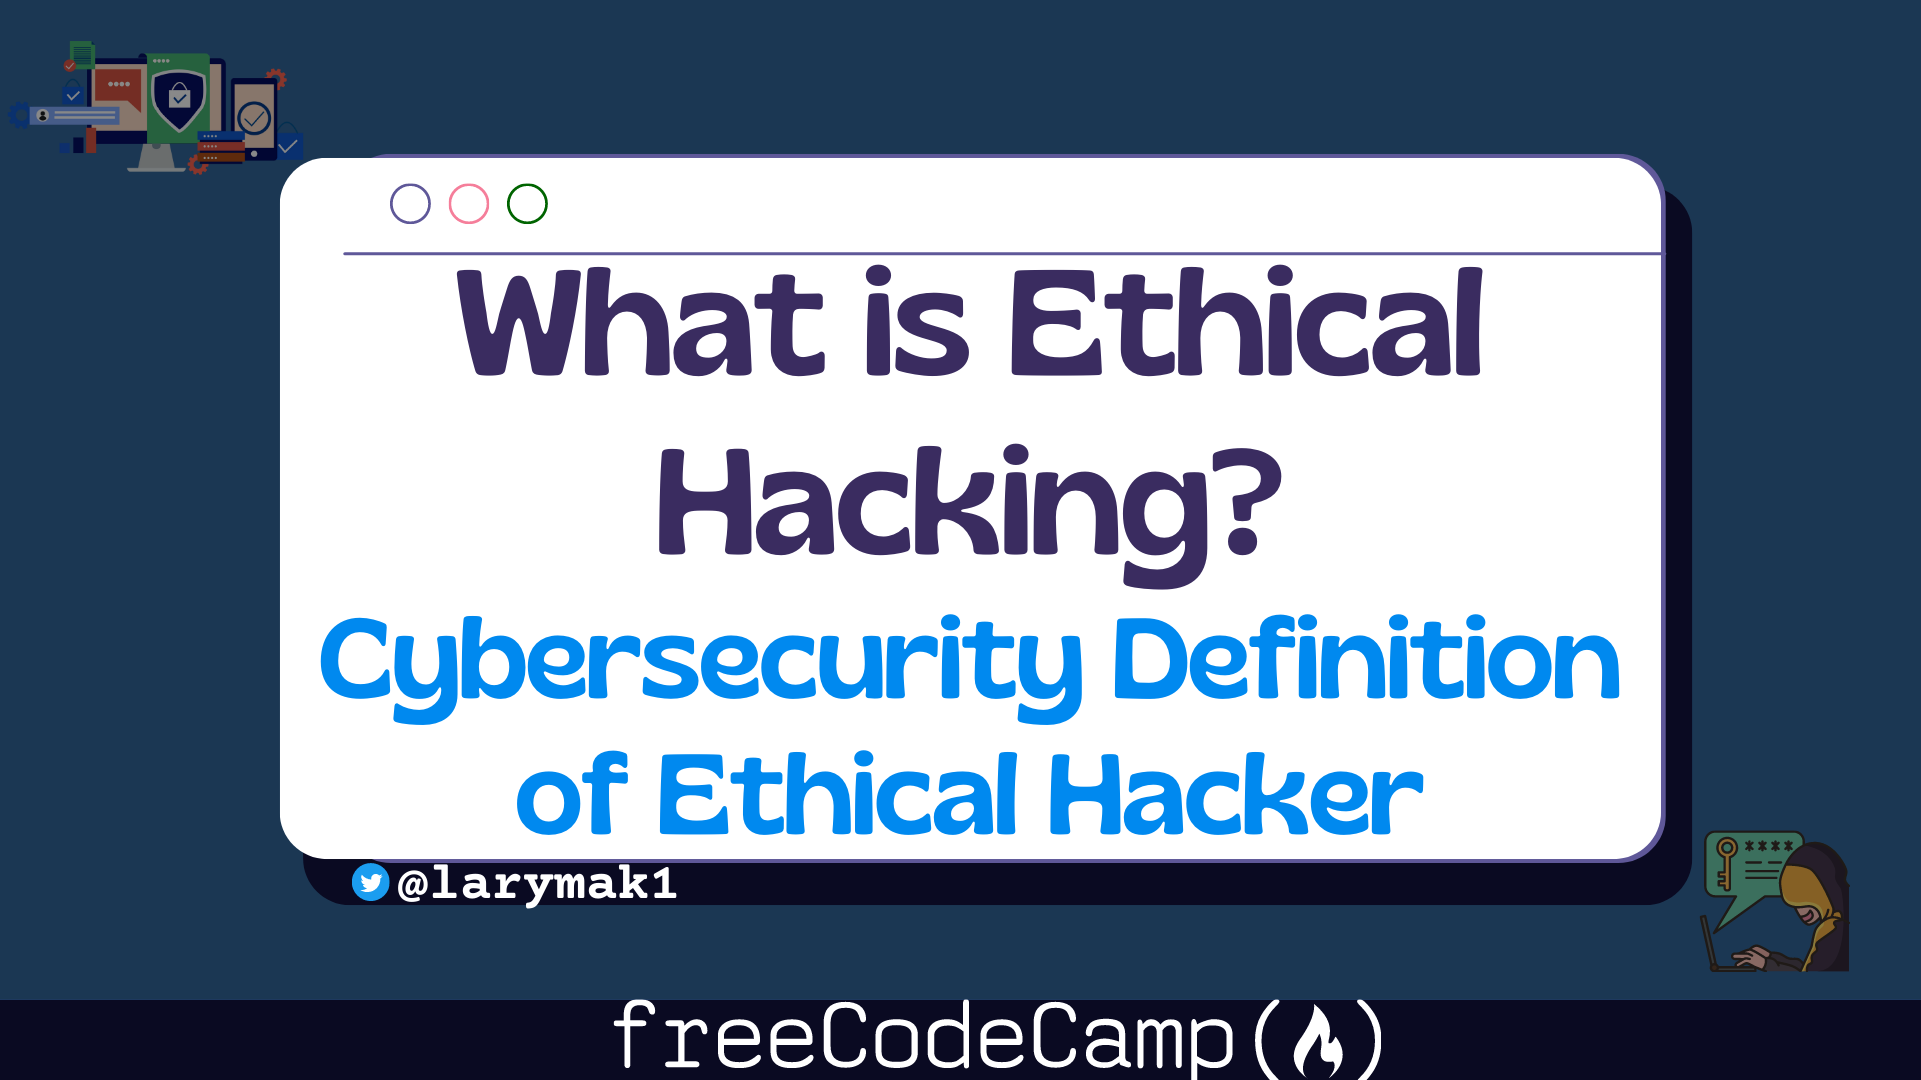 Hacking, Cybersecurity